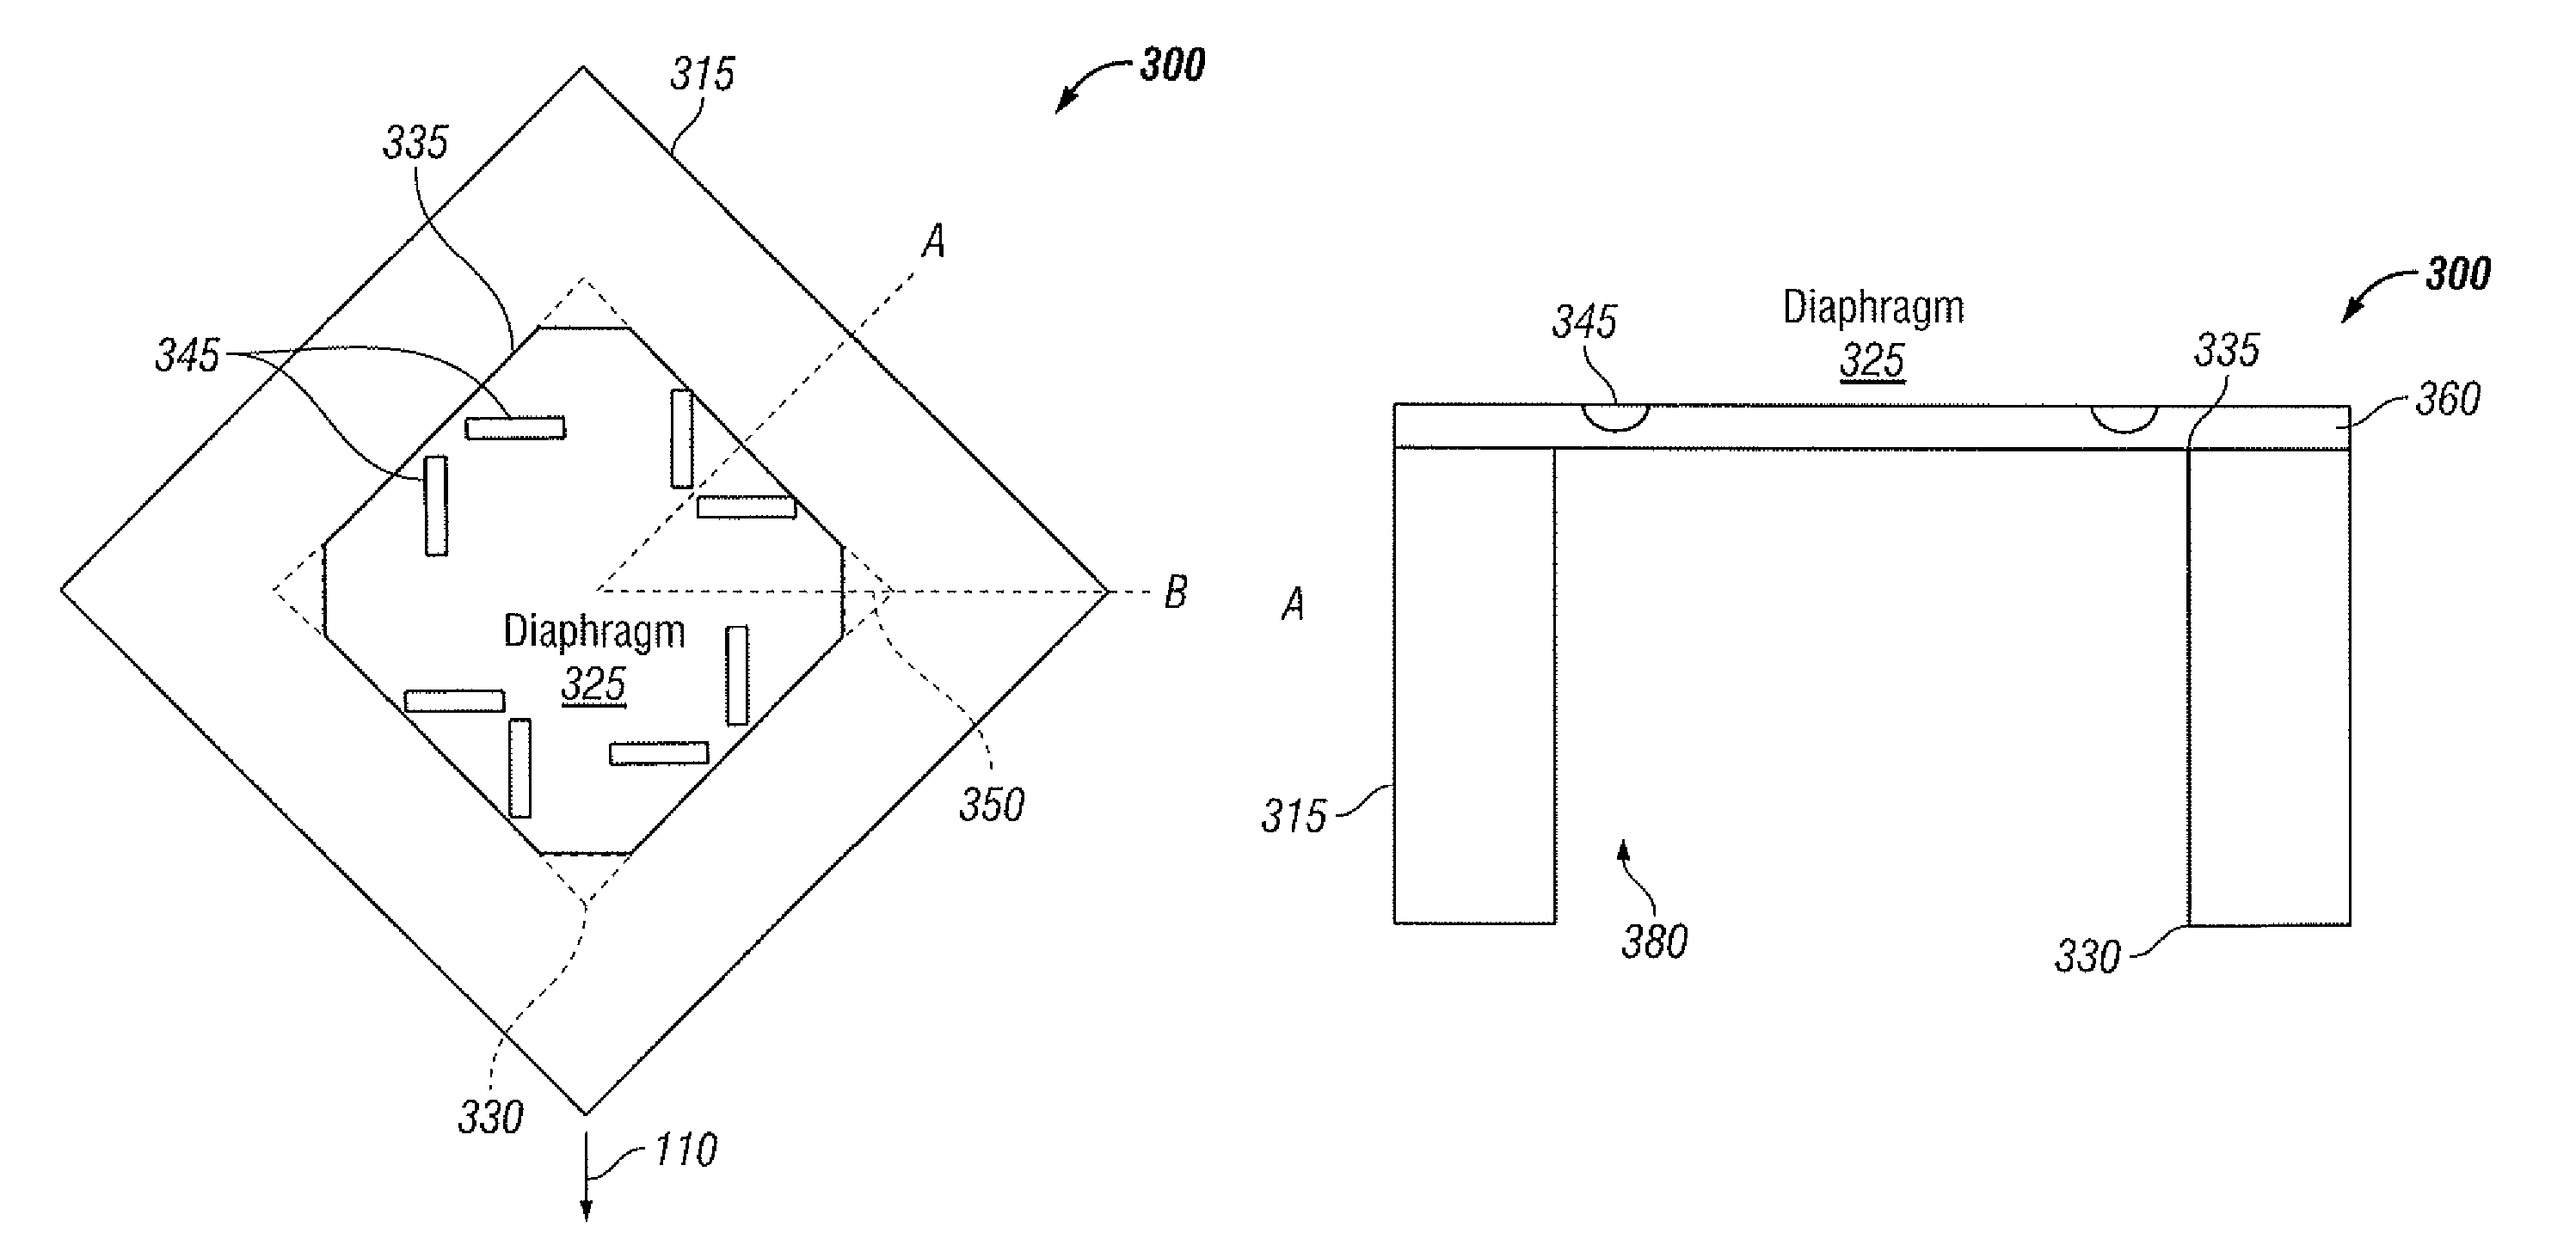 Method and system for etching a diaphragm pressure sensor